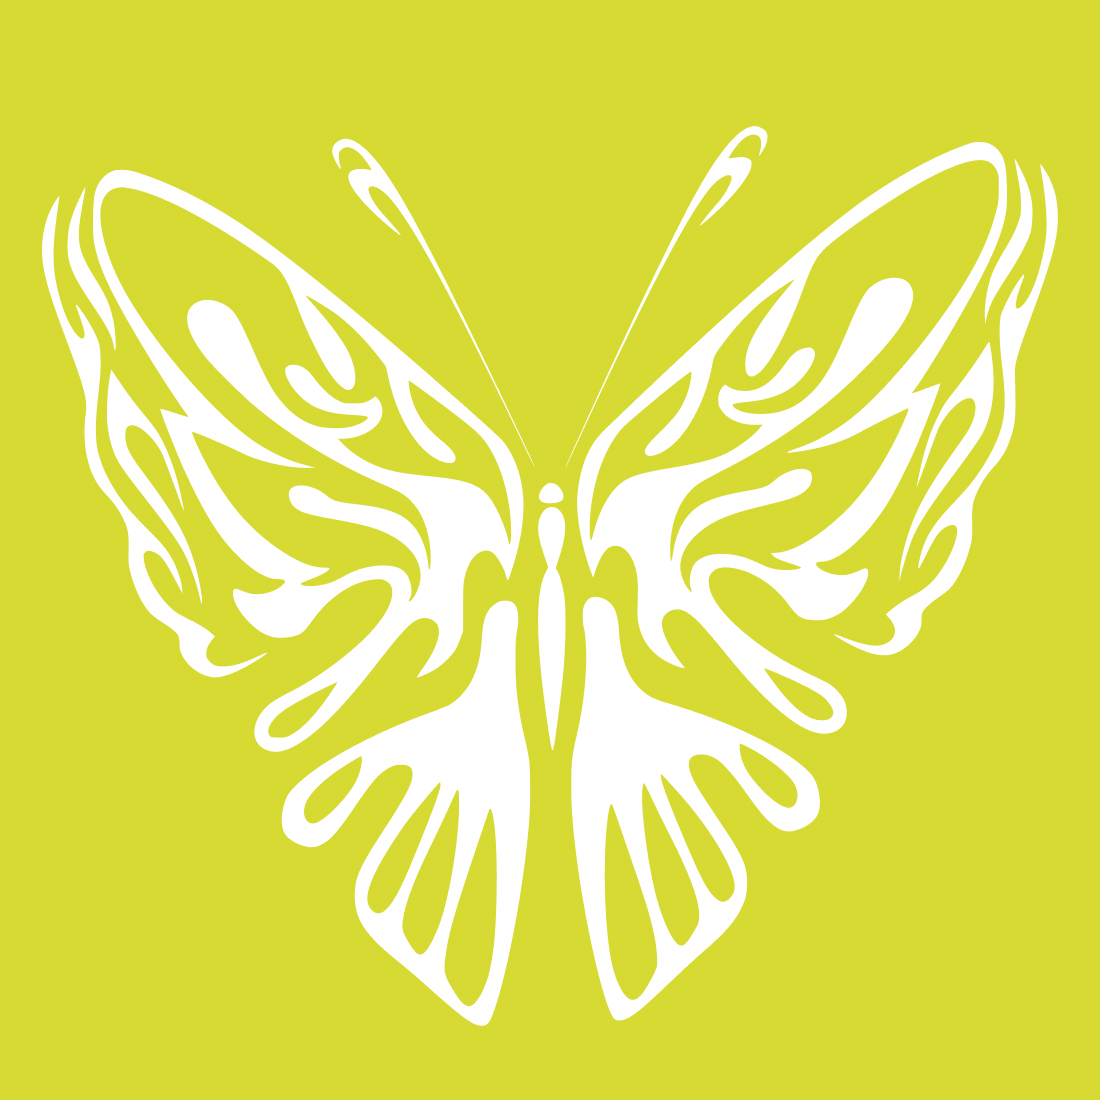 Insect Abstract Butterfly Fly SVG cover image.